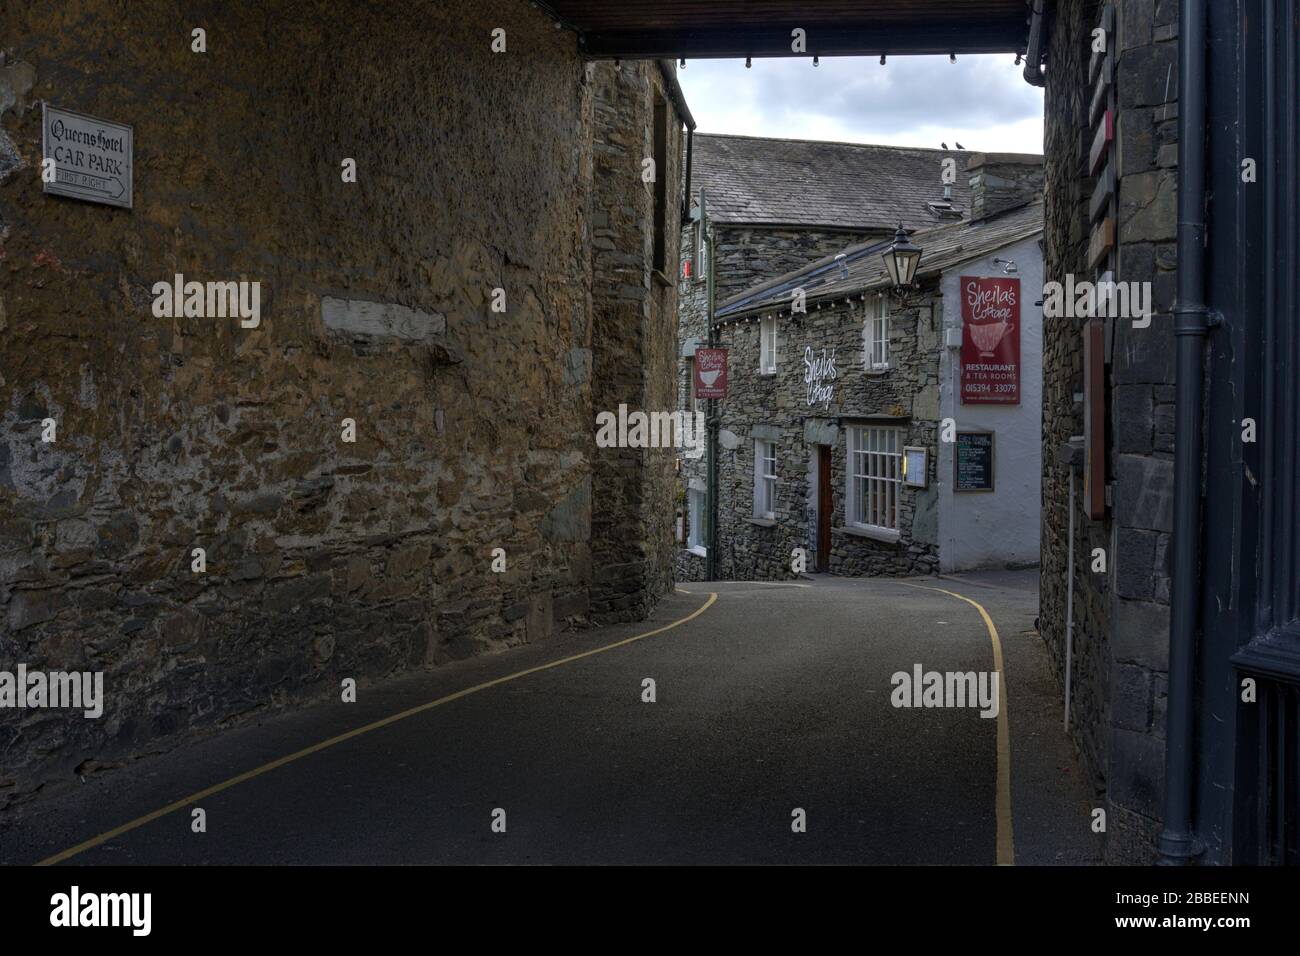 Ambleside, Cumbria, United Kingdom - May 16, 2019: Exterior of Sheila's Cottage and Tea Rooms viewed along alleyway shoing road and stone built wall Stock Photo